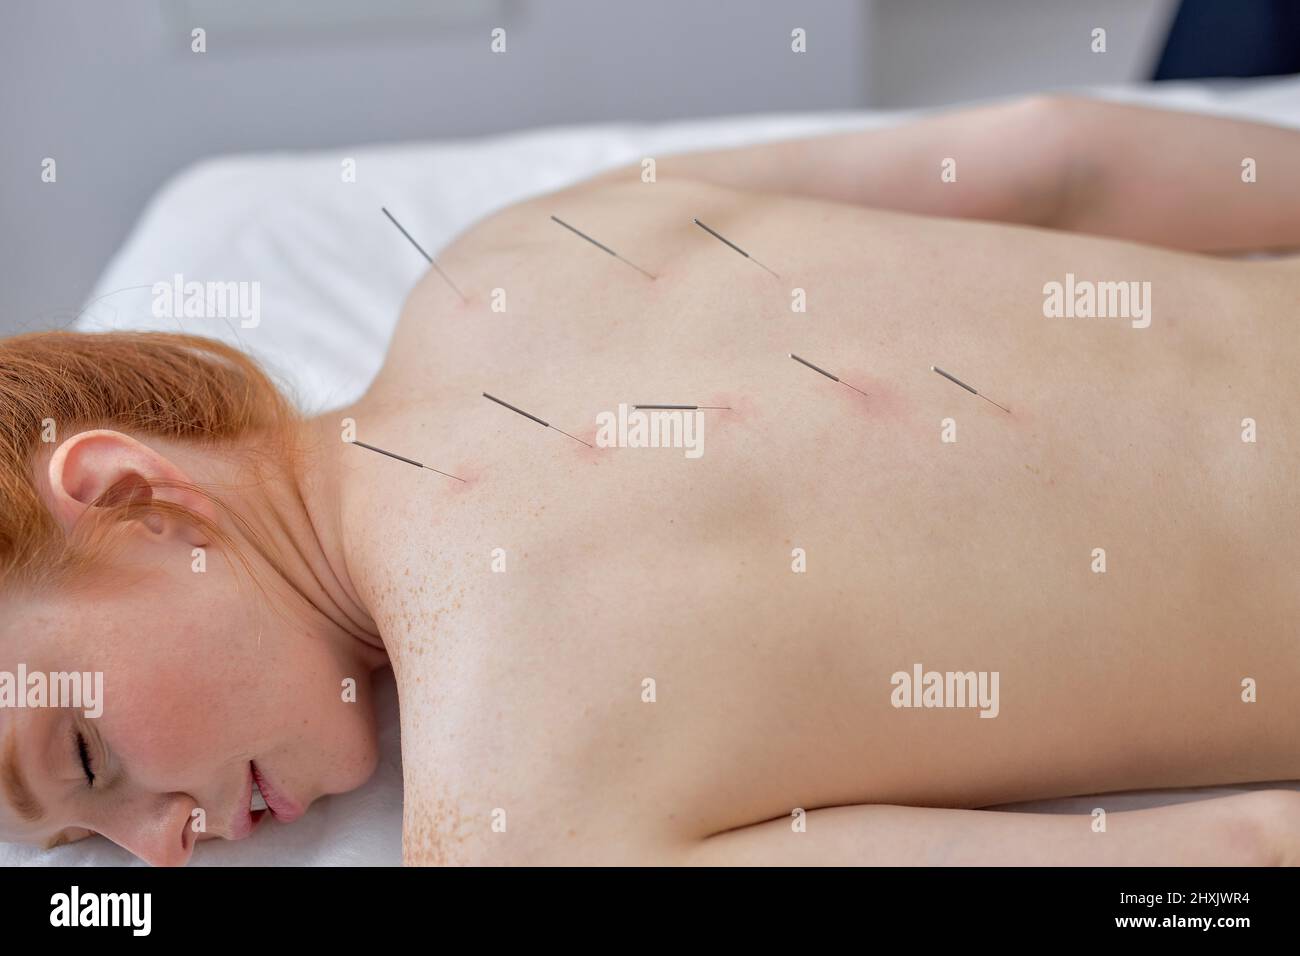 acupuncture therapy on back spine shoulders for woman client. female undergoing acupuncture treatment with a line of fine needles inserted into slim b Stock Photo